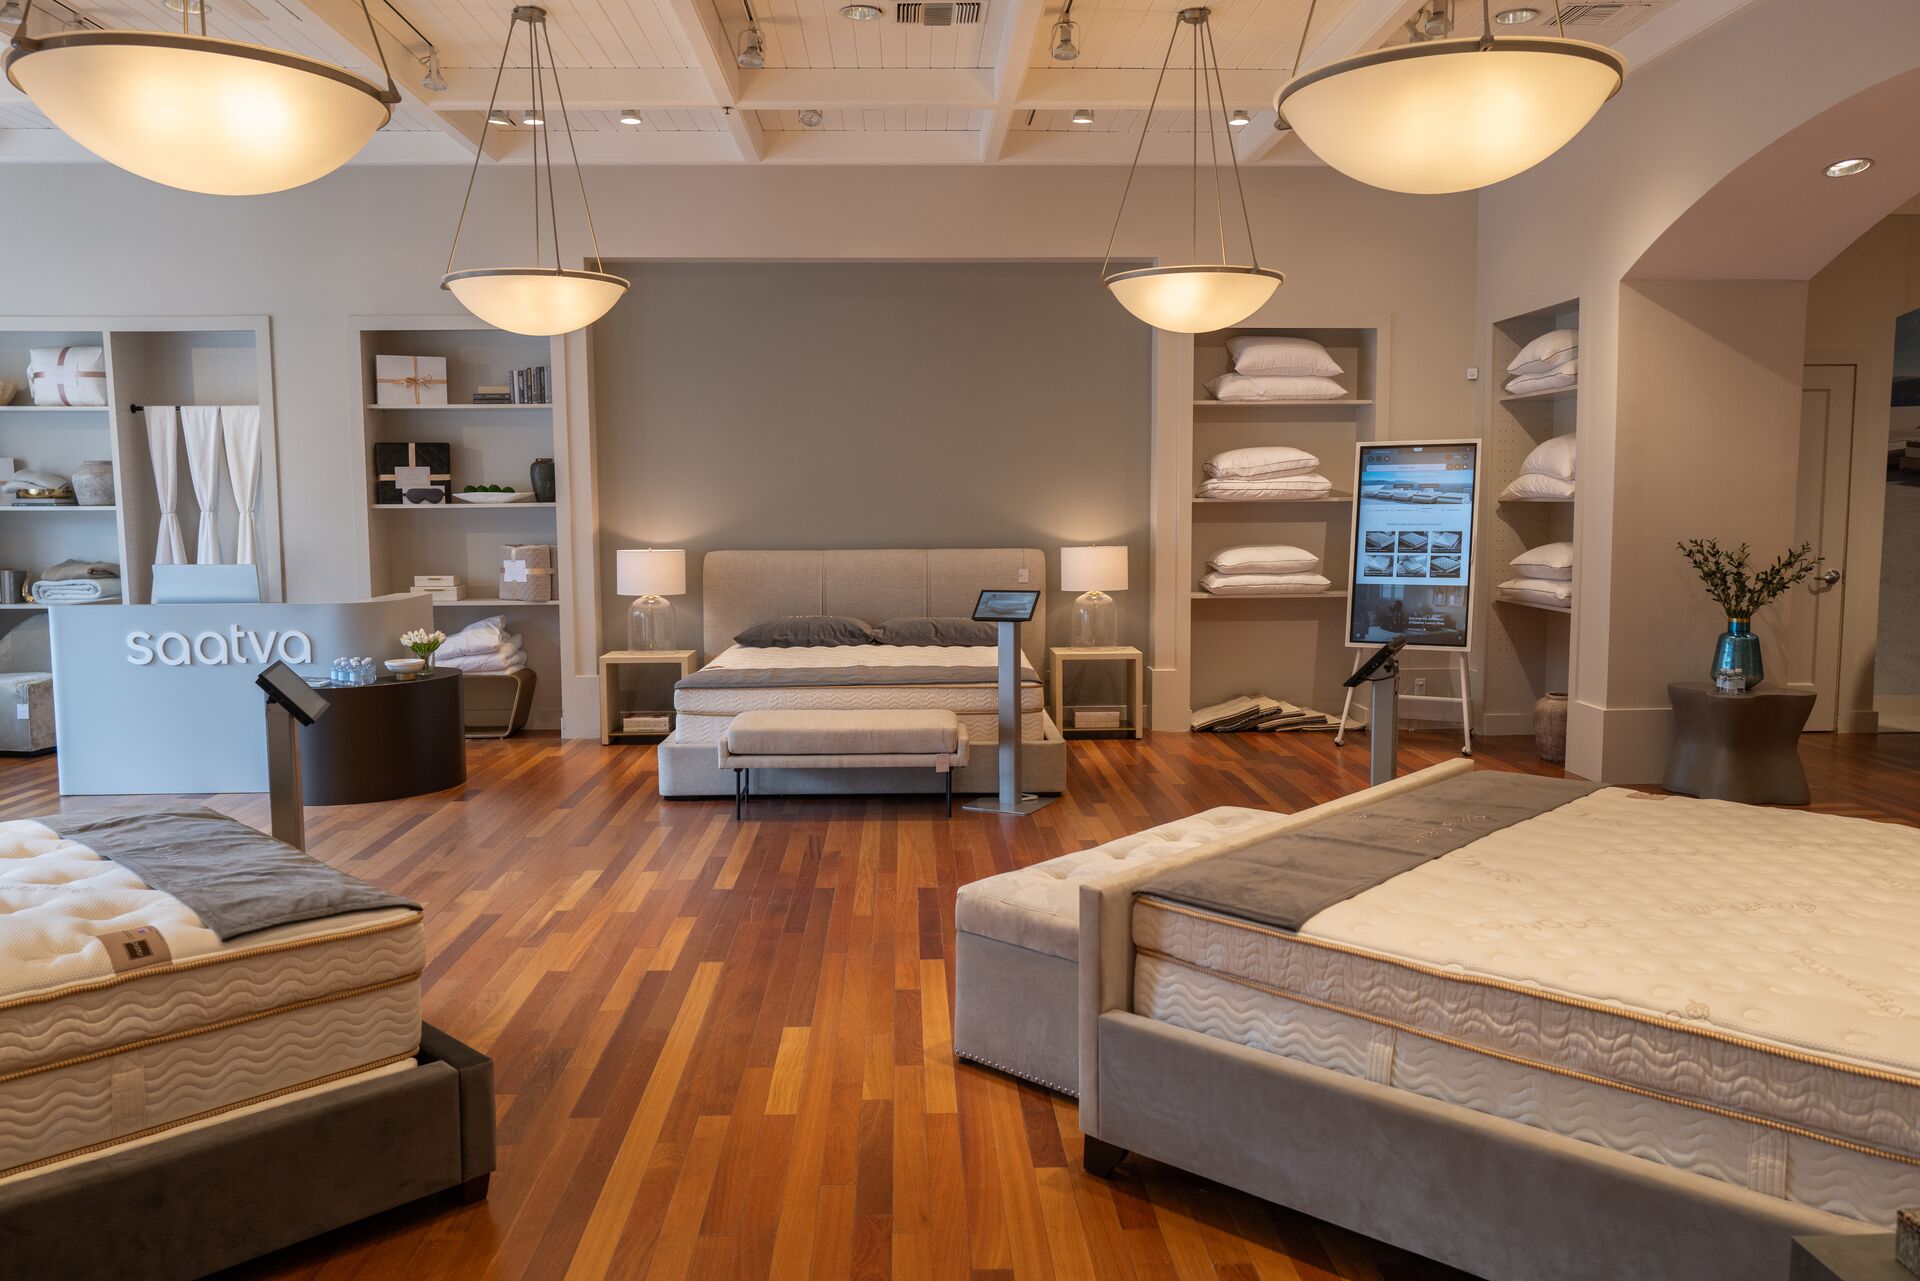 The mattress testing area near the front entrance of the Saatva San Diego retail location at the Westfield University Town Center Shopping Center.